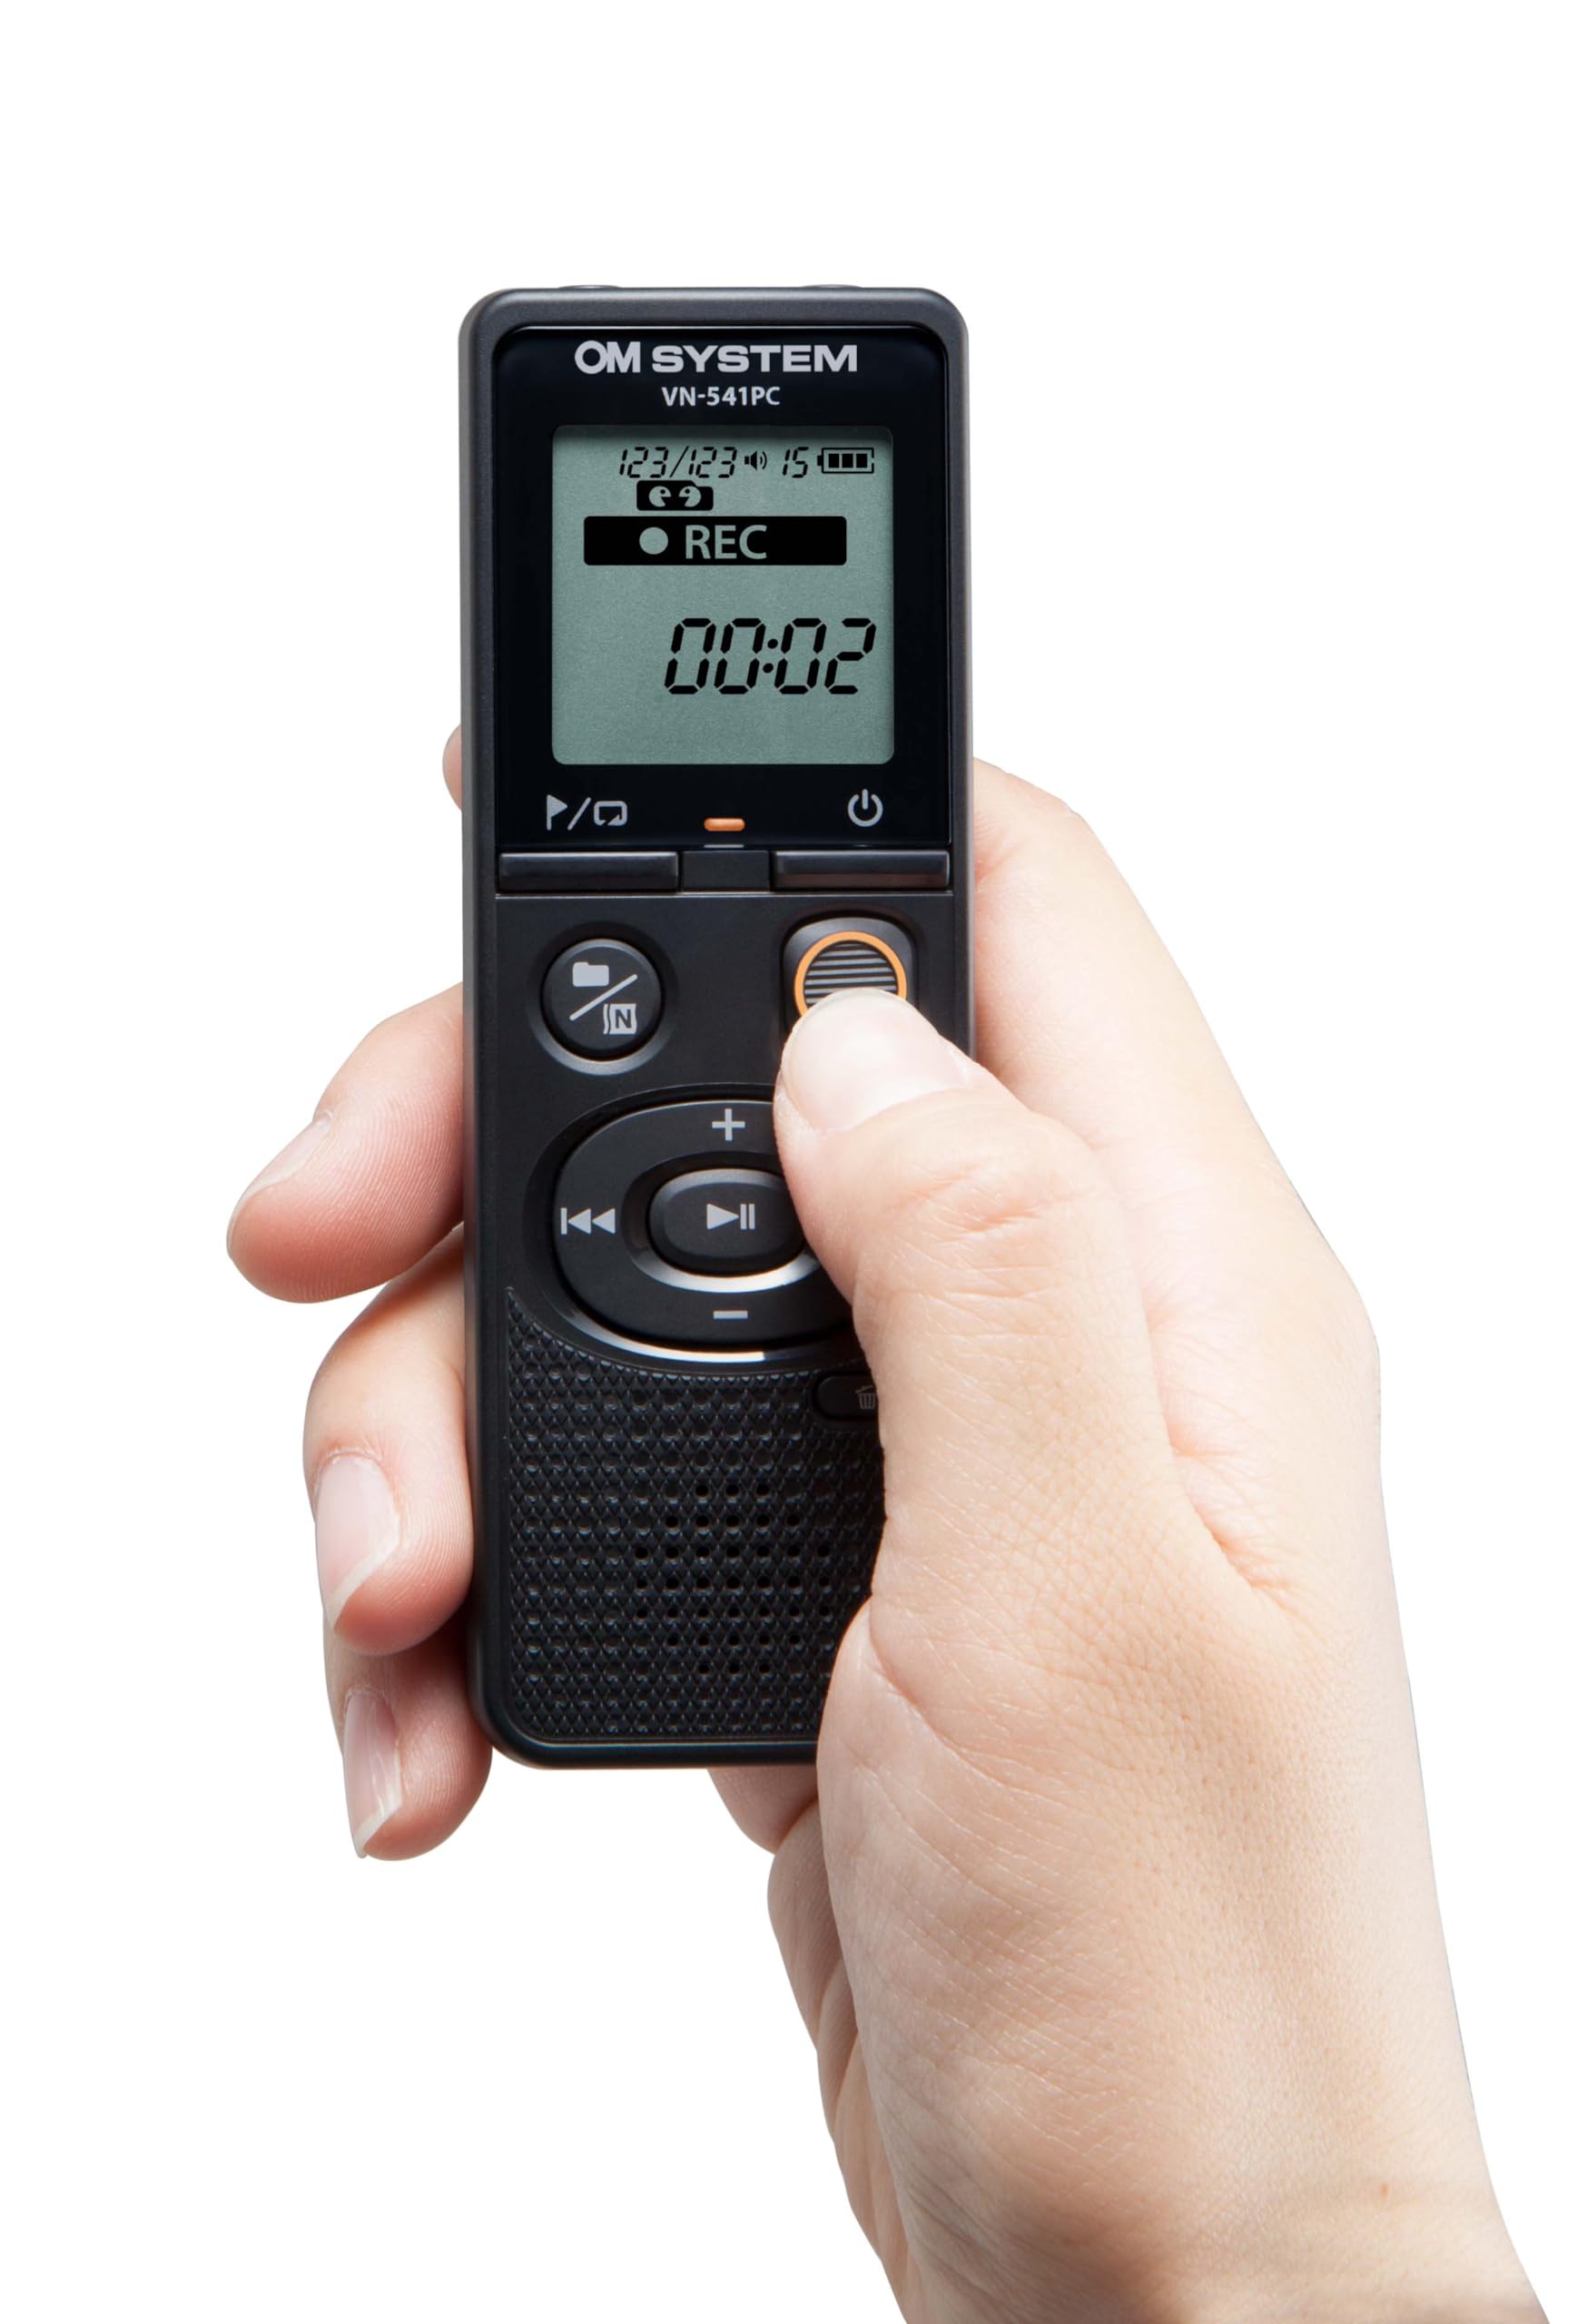 OM SYSTEM Olympus VN-541PC Digital Voice Recorder with one-Touch Recording, Noise-Cancellation Function, 4GB Memory, Four Scenes Recording, Includes a Micro-USB Cable.